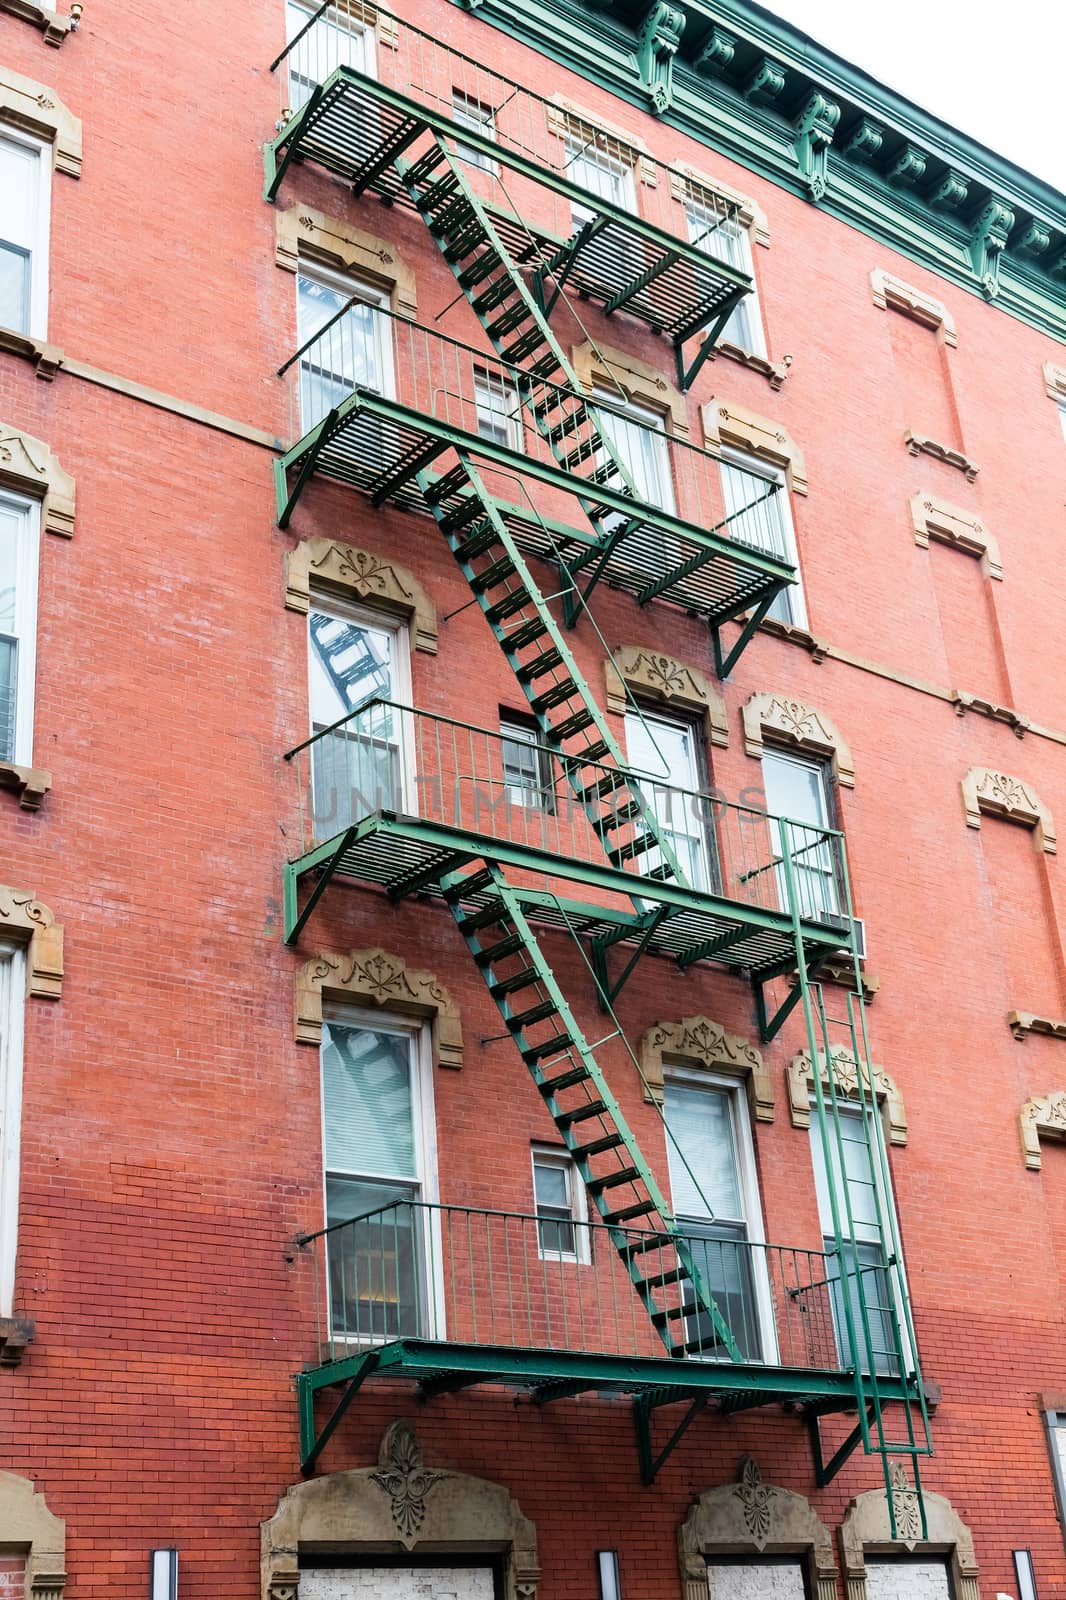 Fire stairs on the New York house by hanusst